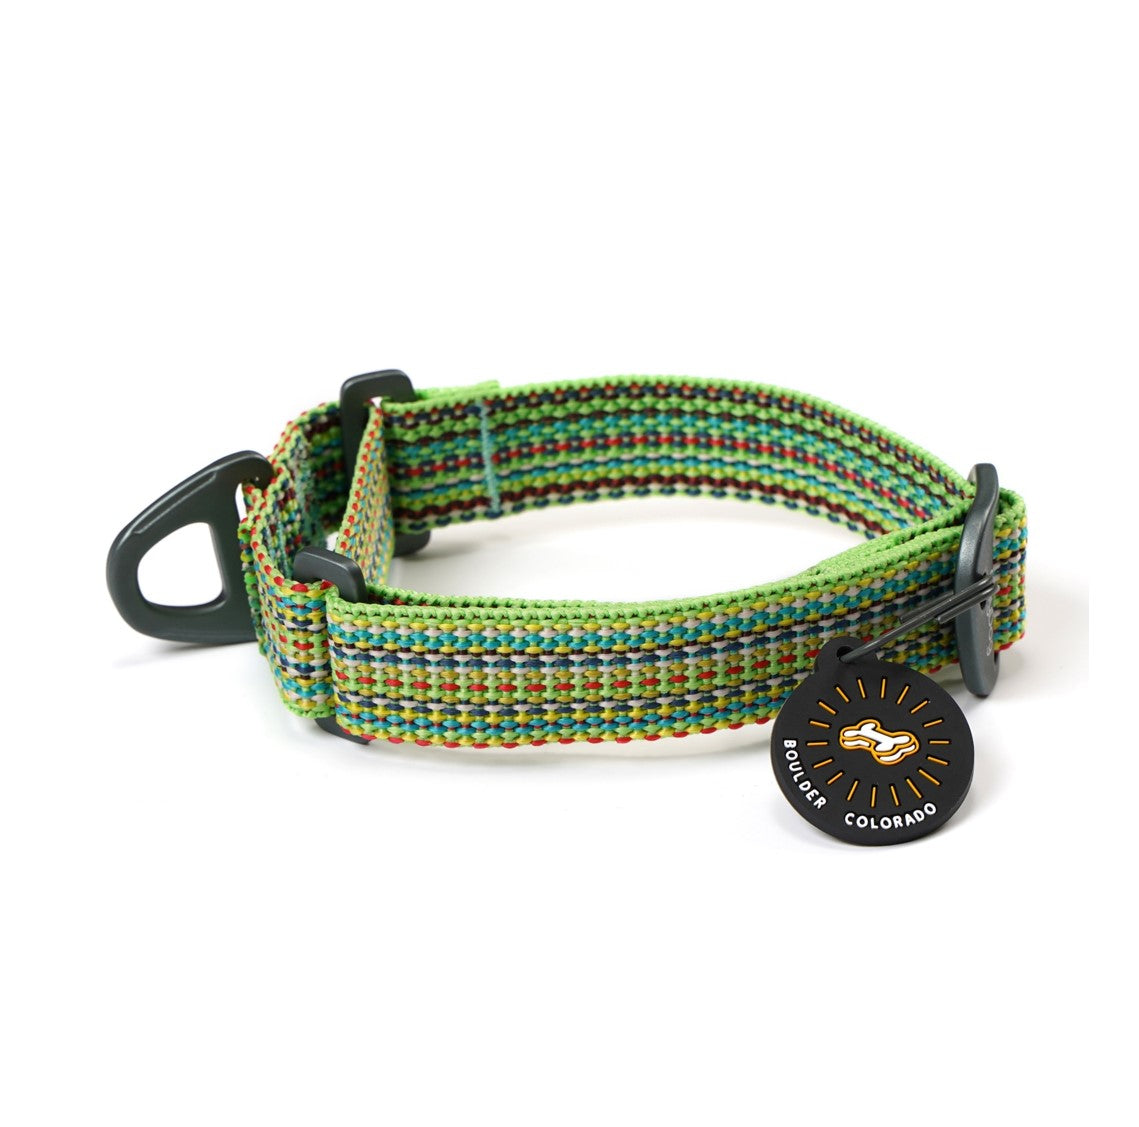 Martingale Rescue Mesa Collar- Save 20% at Checkout